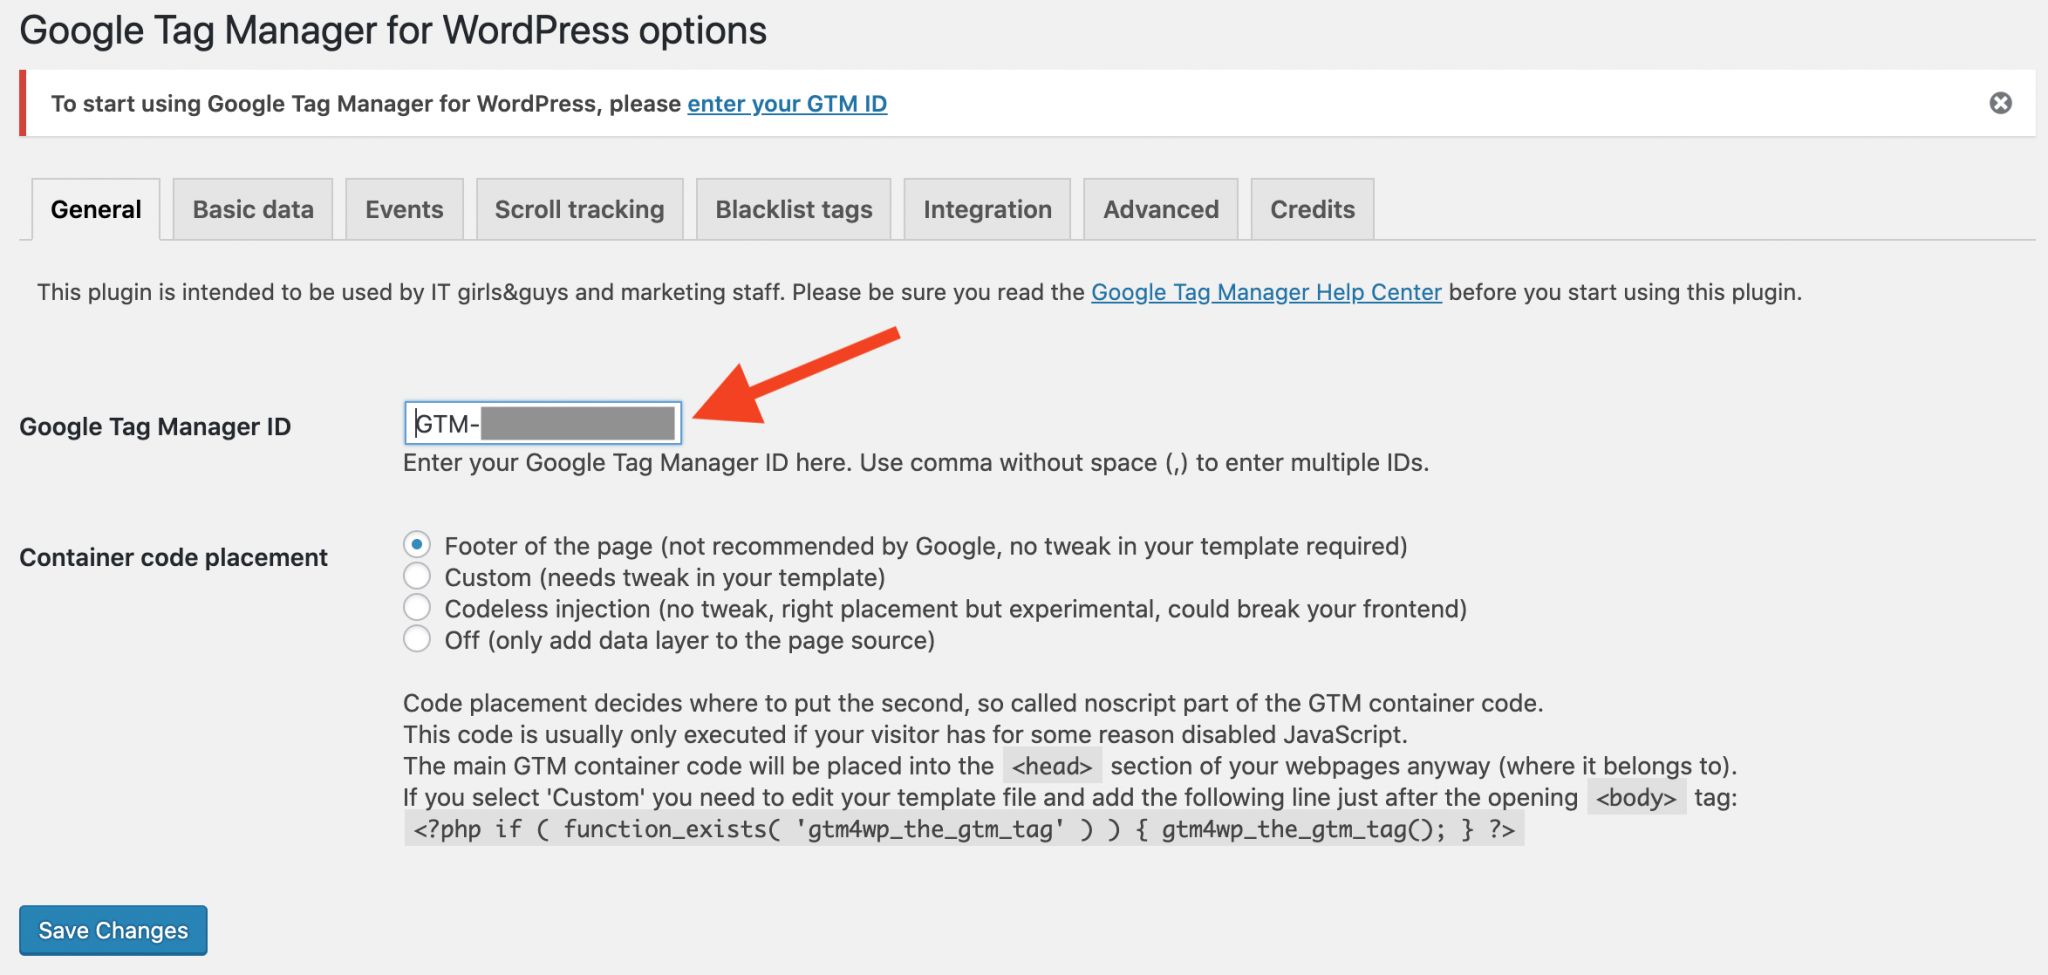 Where to put the Google Tag Manager ID on wordpress admin